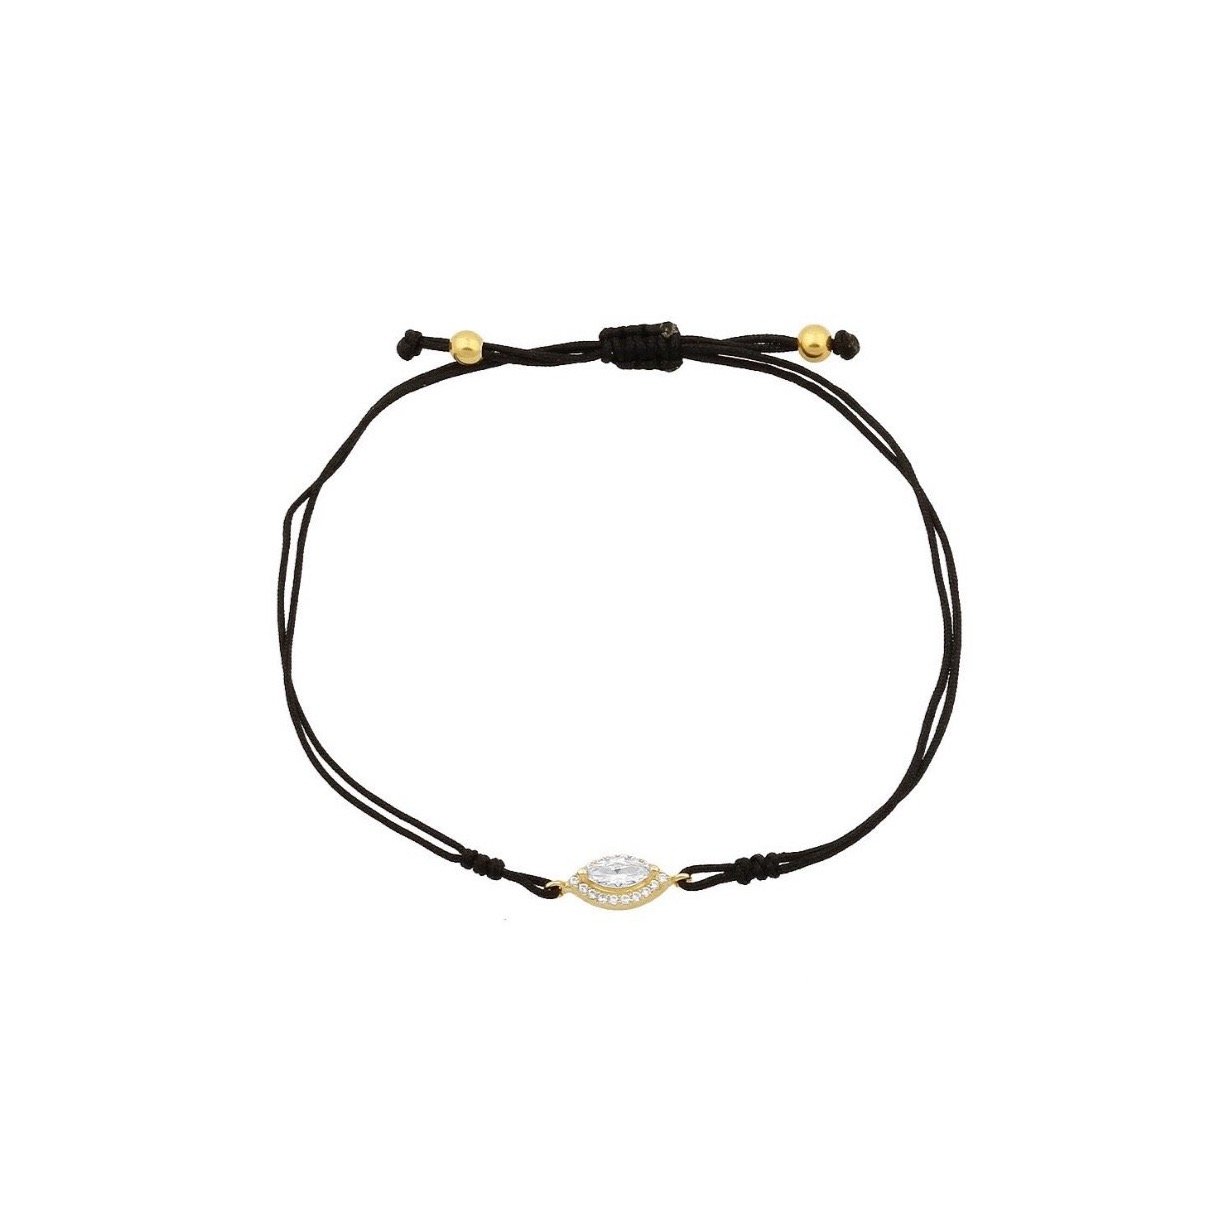 Oval Crystal on a Black Cord Bracelet JEWELRY The Sis Kiss